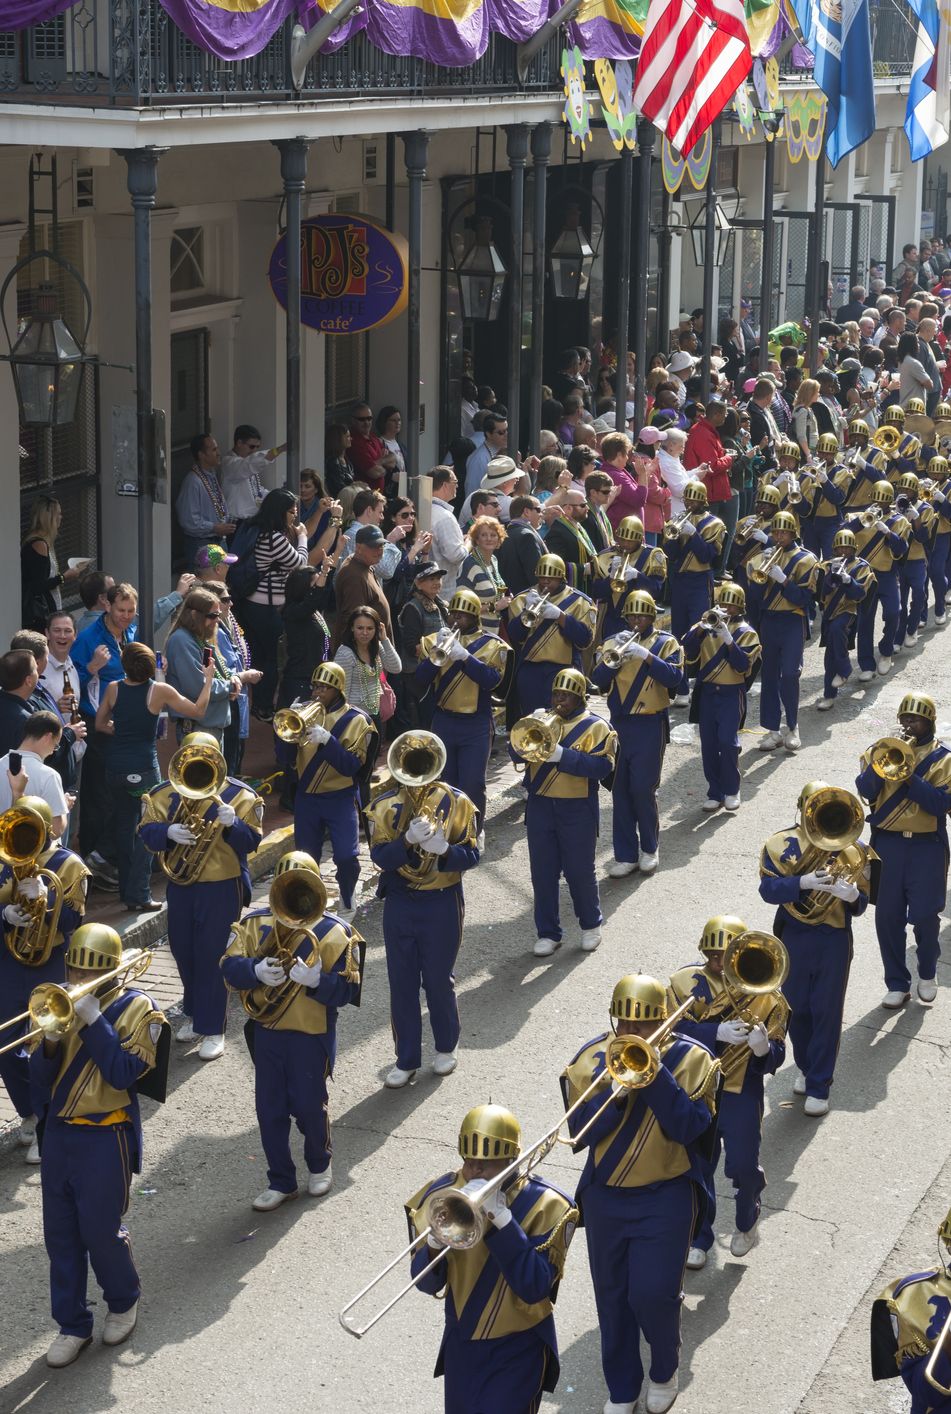 mardi gras traditions marching band